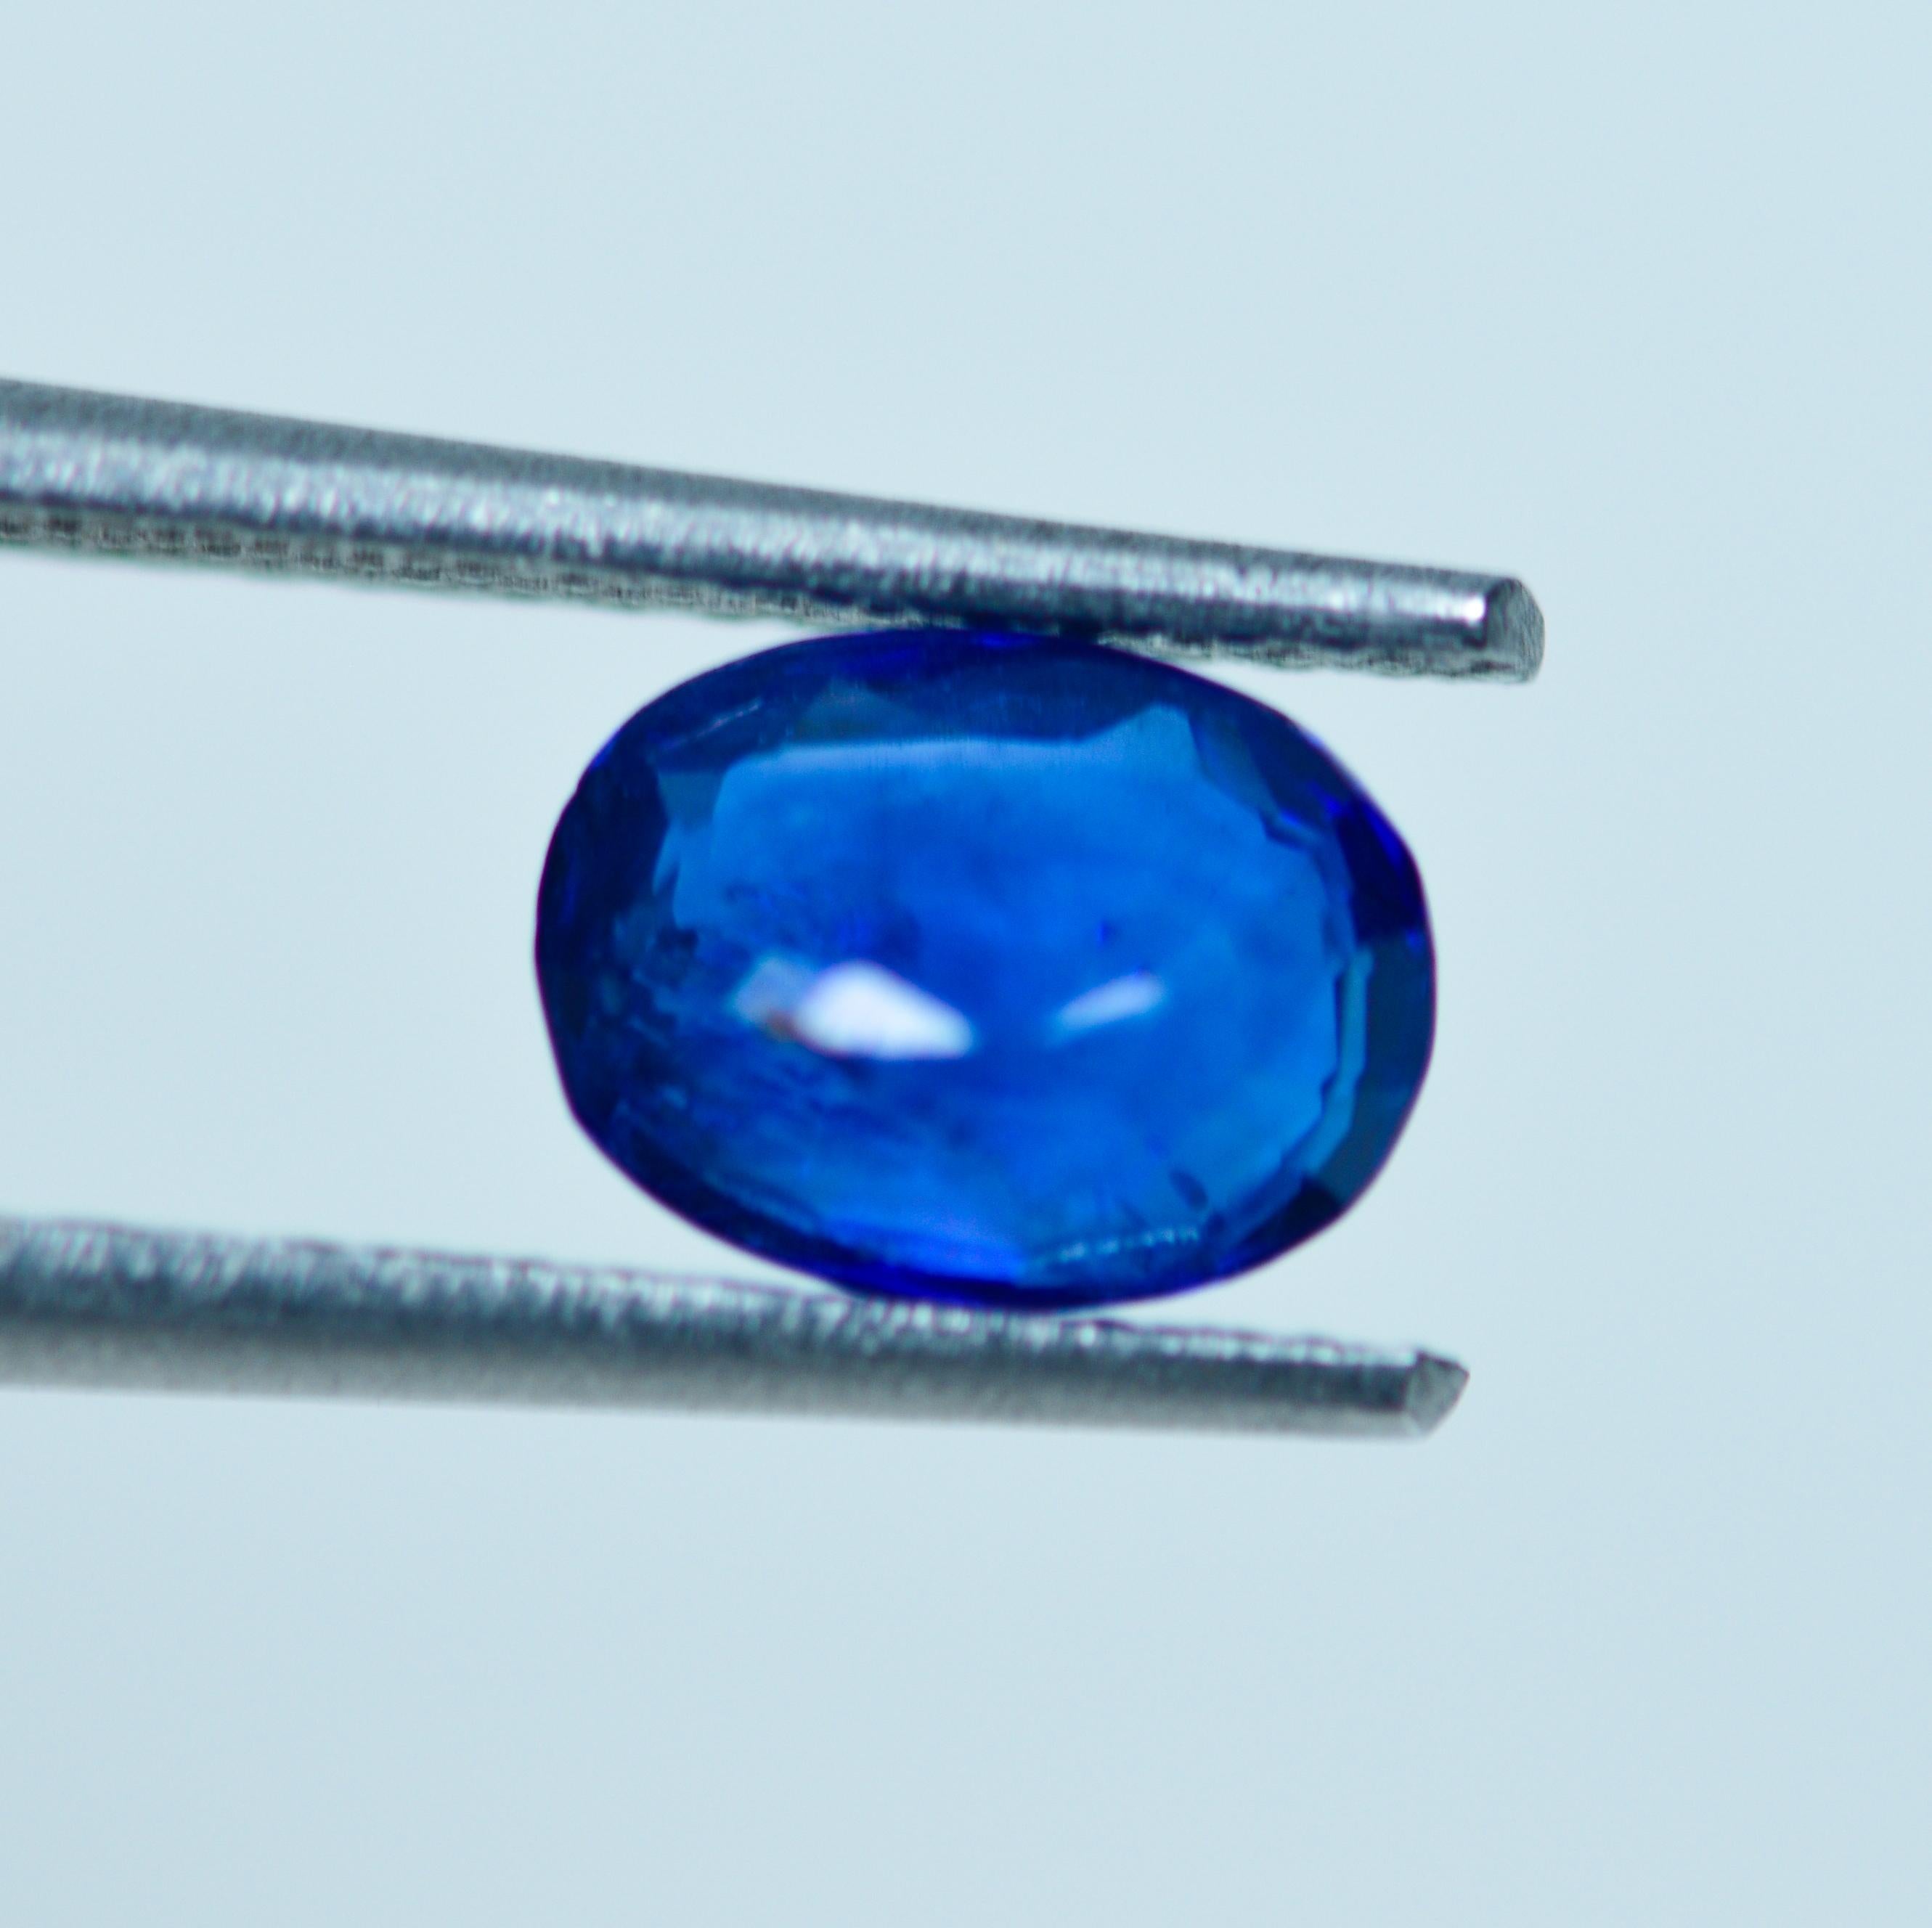 Species : Natural Corundum
Variety : Natural Sapphire
Shape and Cut : Oval Mixed Cut
Weight : 1.35 Carat
Measurements : 7.04 x 5.31 x 3.89 mm 
Color : Blue
Transparency : Transparent
Treatment : Heated Only

This Beautiful Blue Sapphire Can Be Used